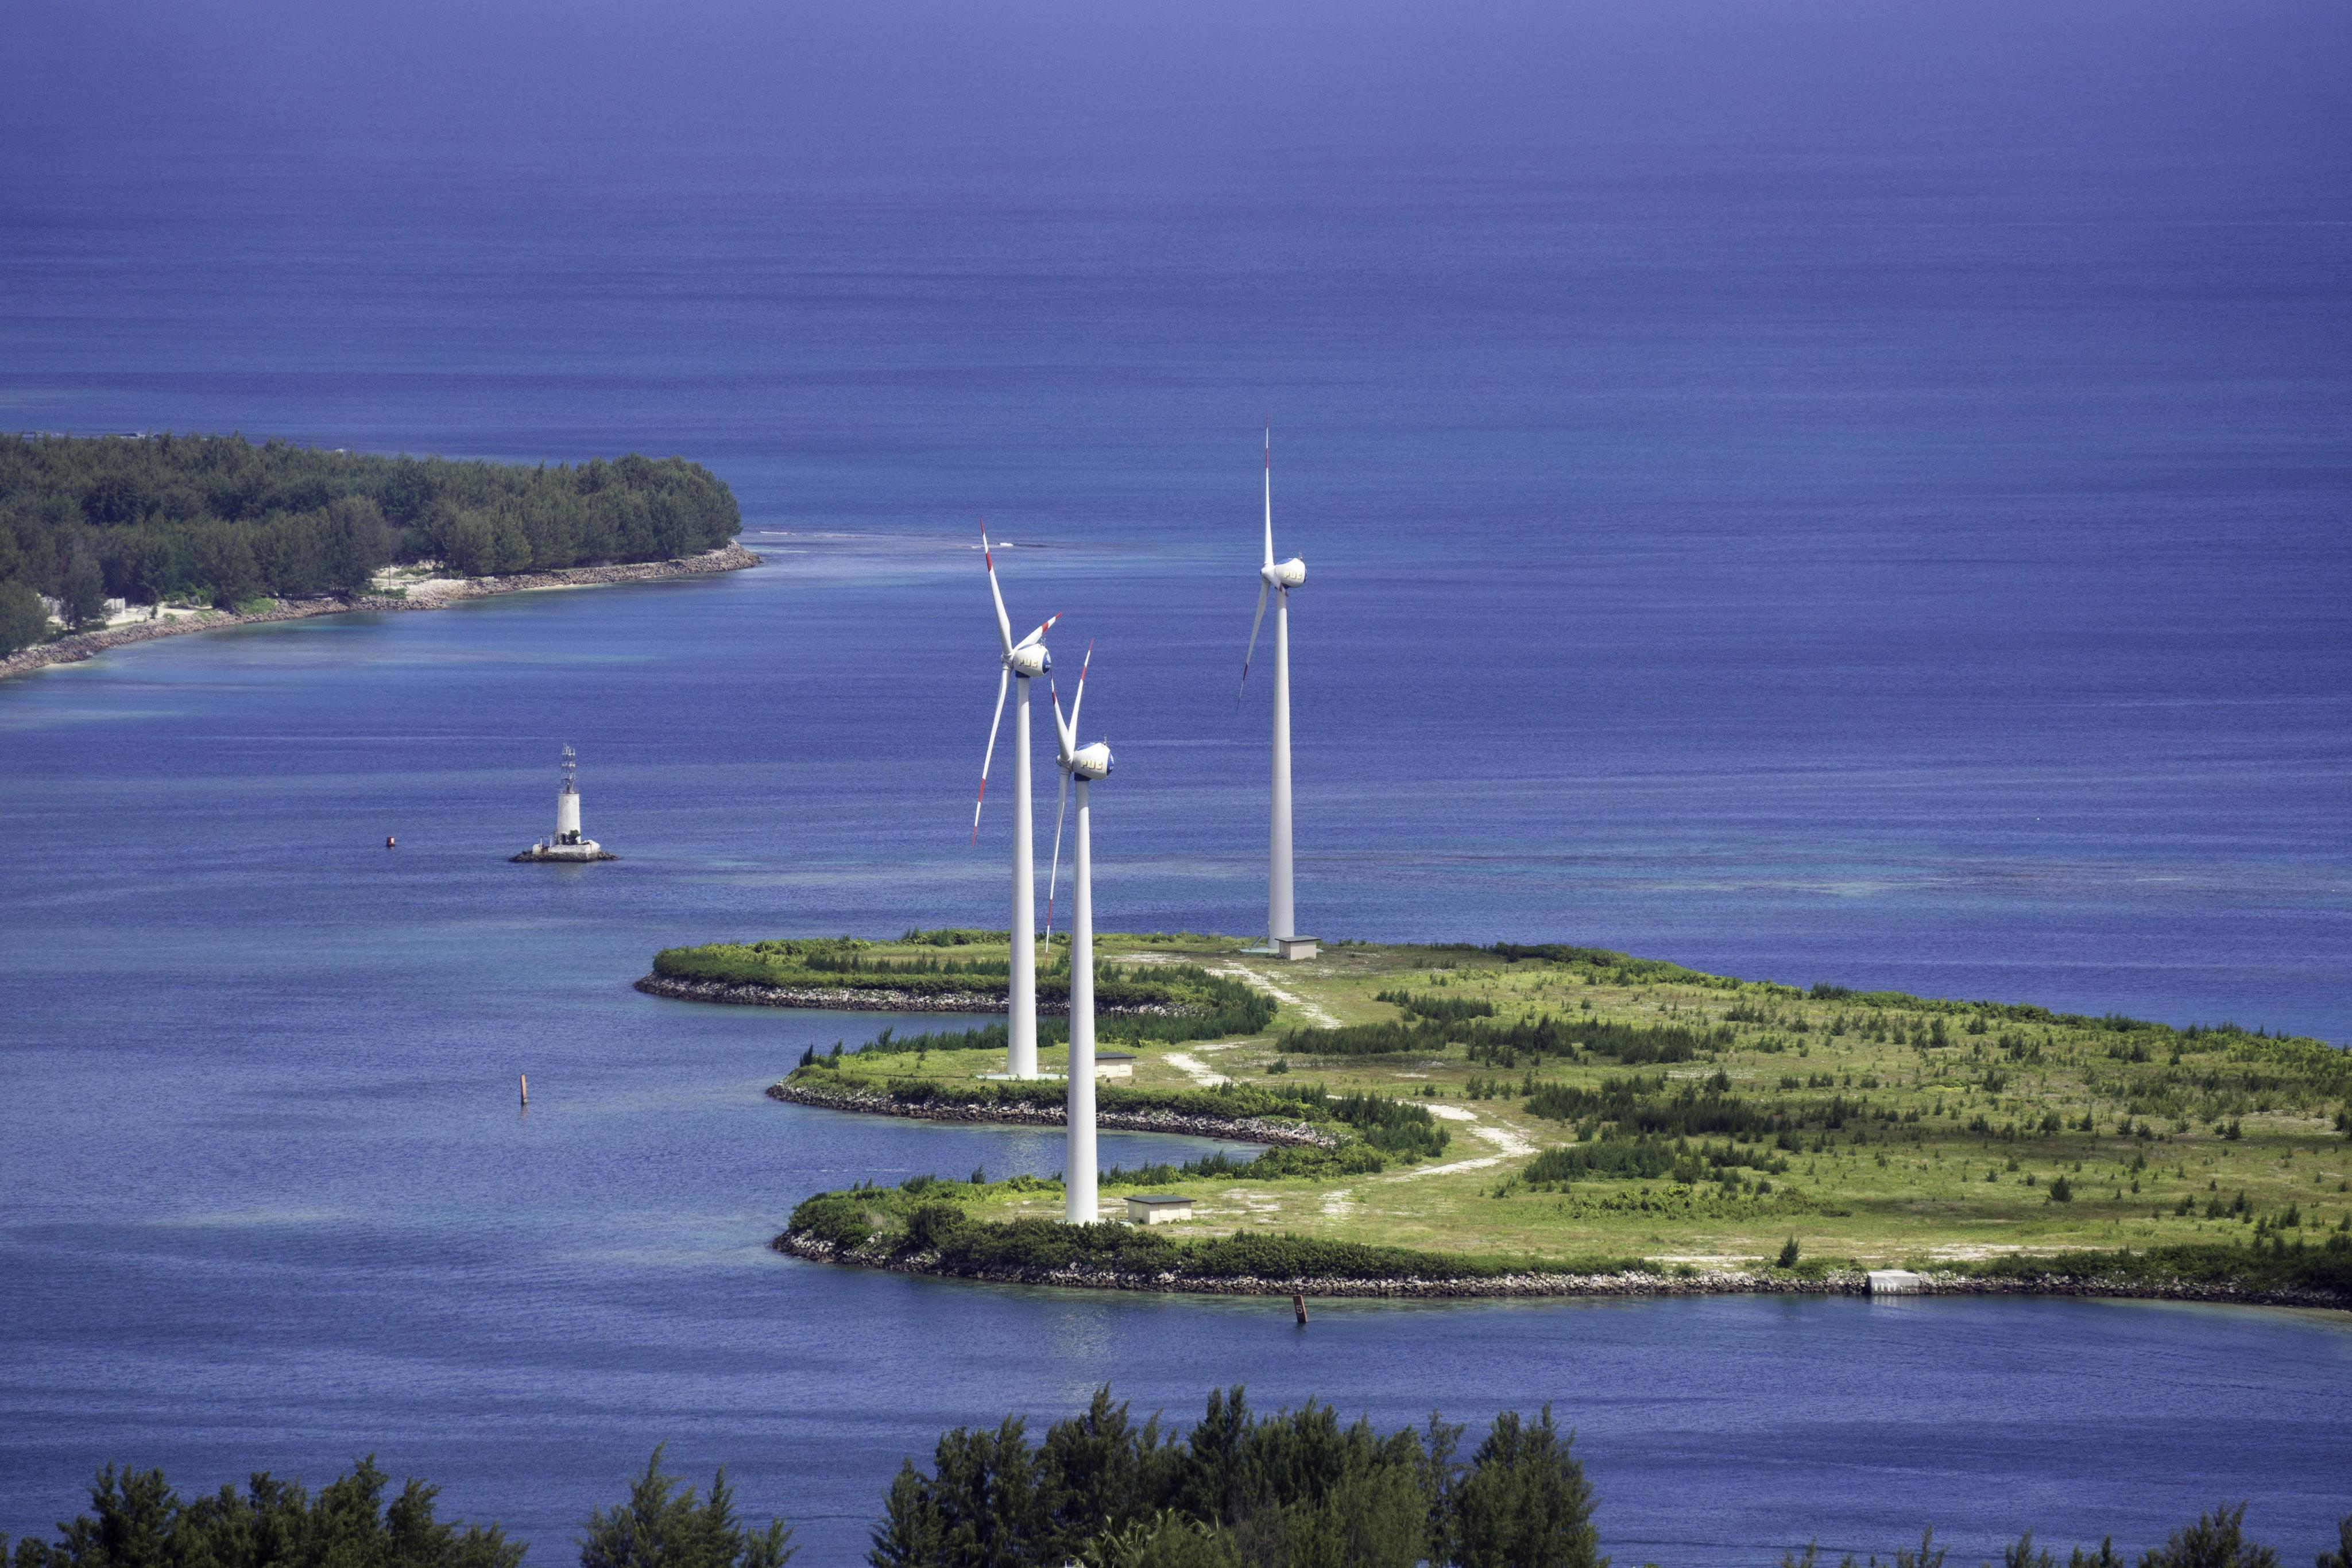 Humanity needs sustainable power supply: wind farm in the Seychelles